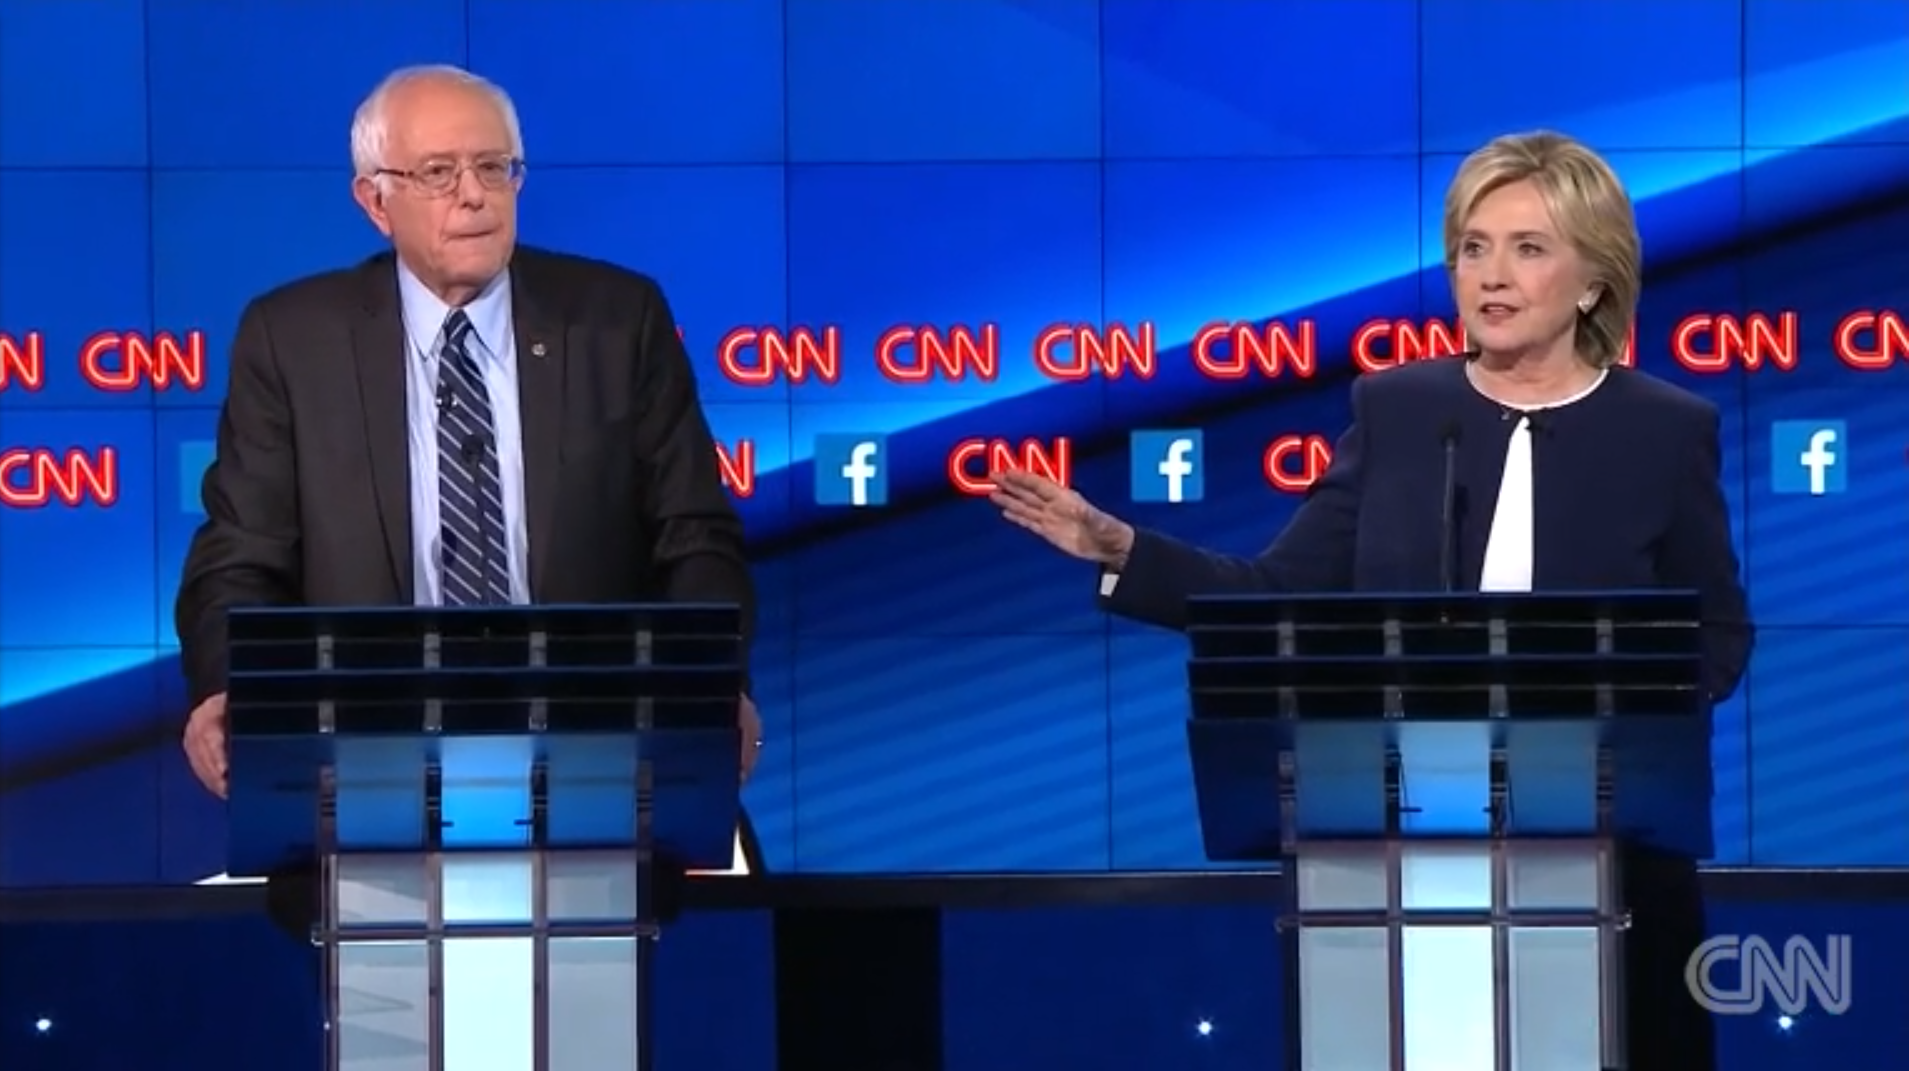 Seven Substantive Issues That Divide the Democratic Candidates